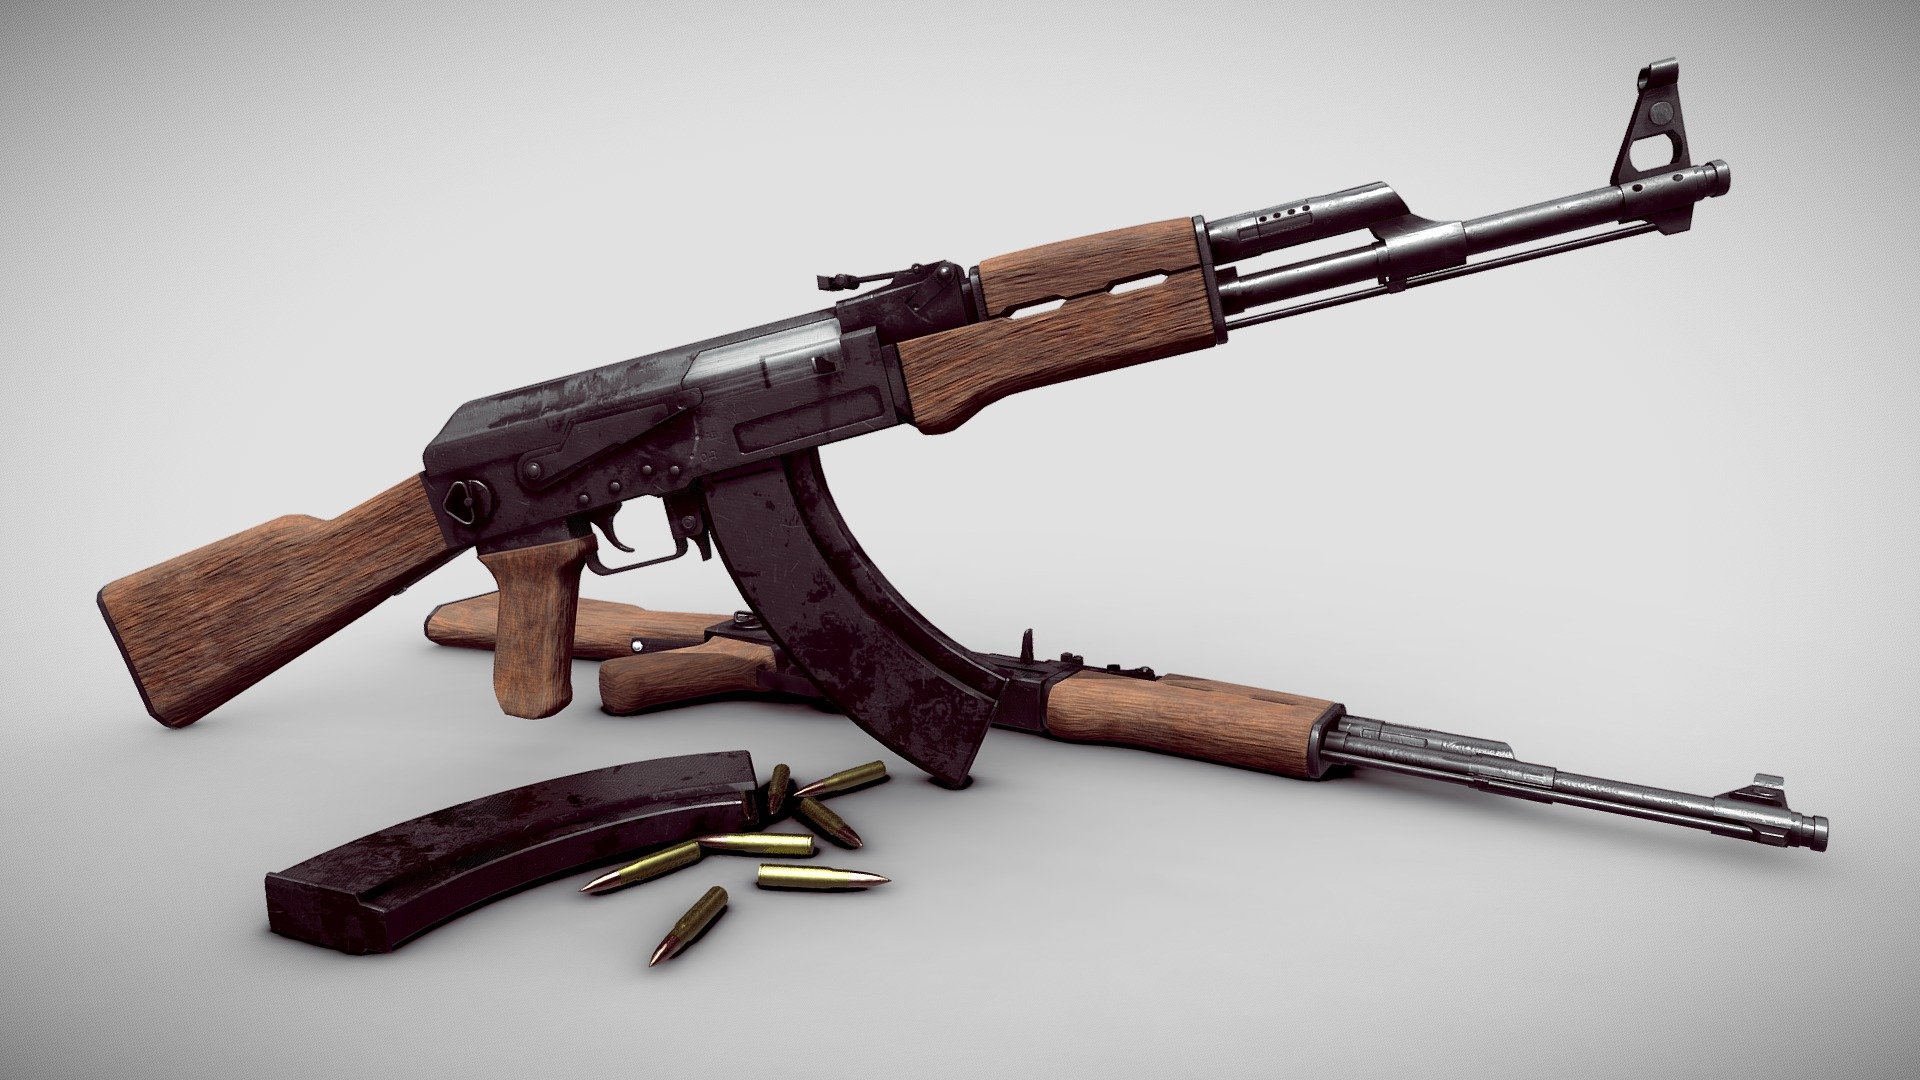 Another 12 hour modelling challenge where I modelled, unwrapped and textured an AK-47. I would like to further advance upon this model in the future with attachments and different variations 3d model